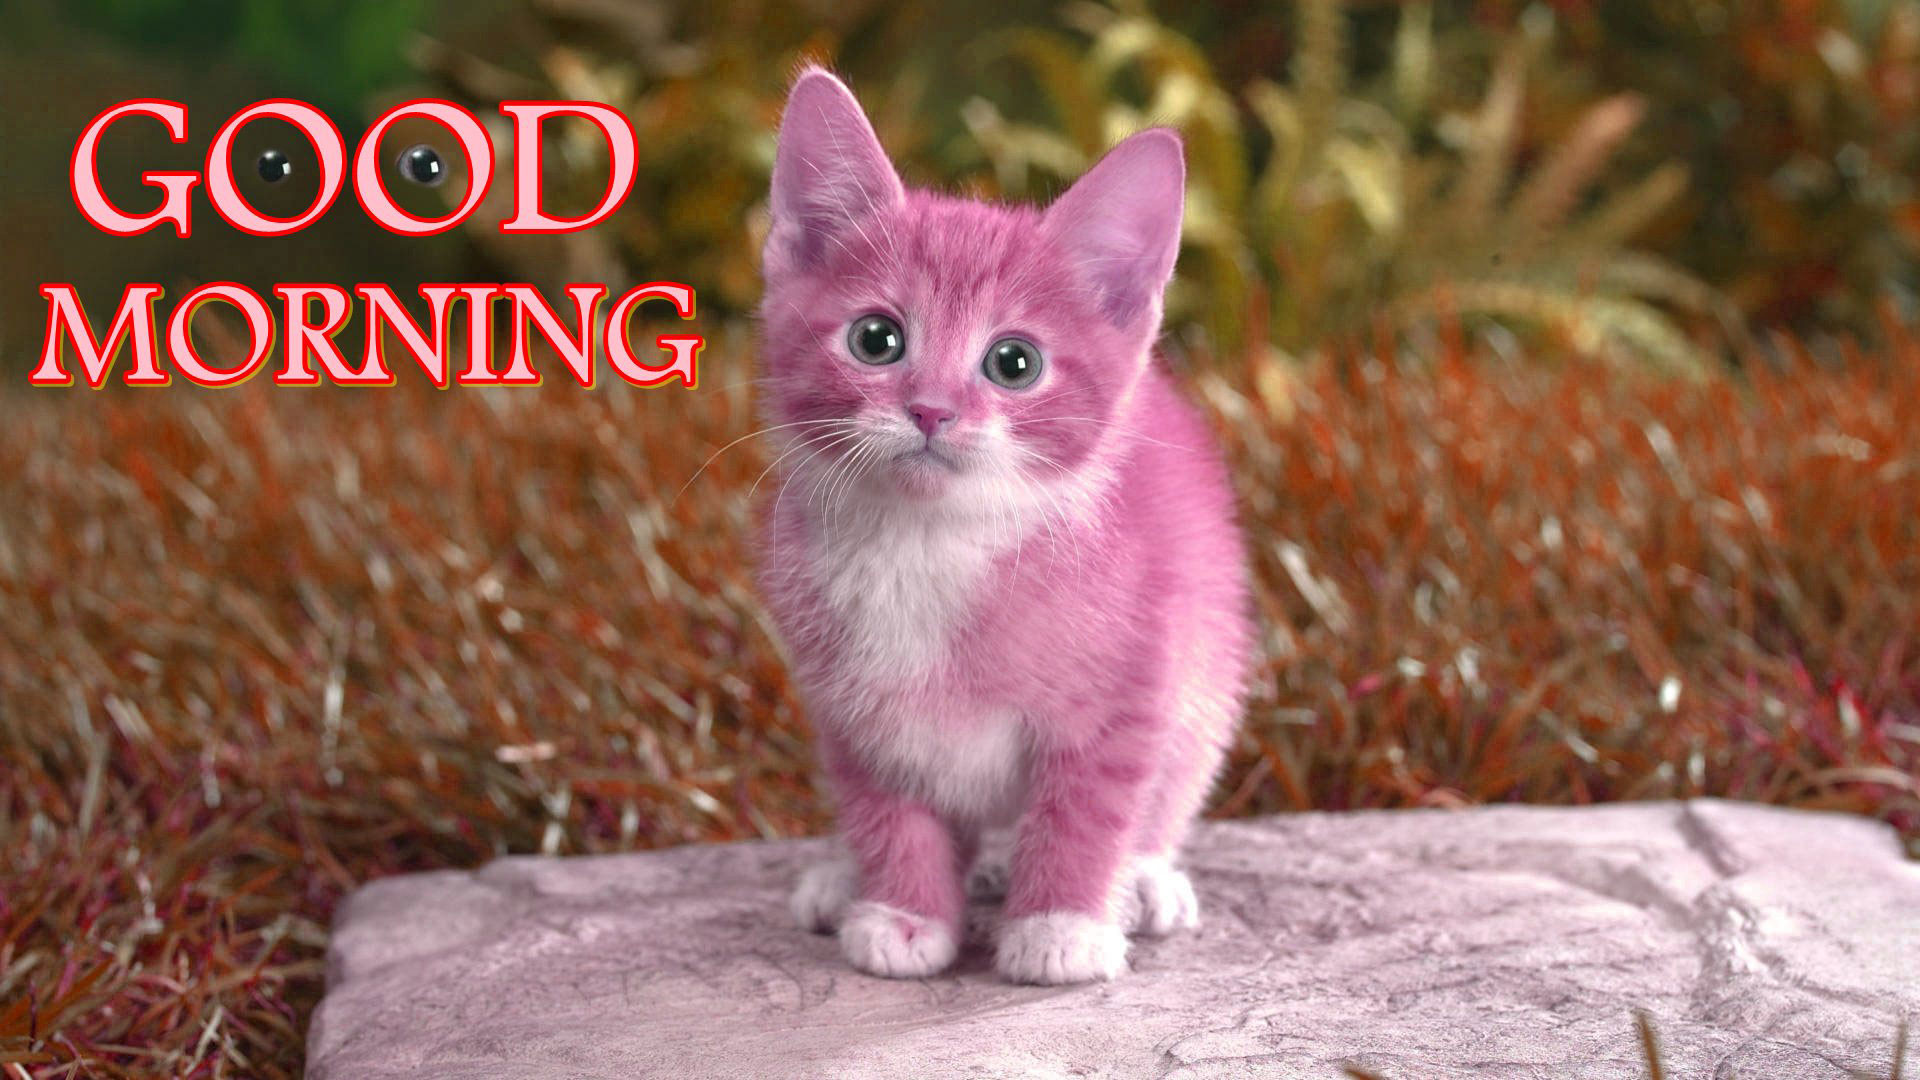 1920x1080 hd pics photos cute cat good morning wishes for facebook hd quality desktop  background wallpaper